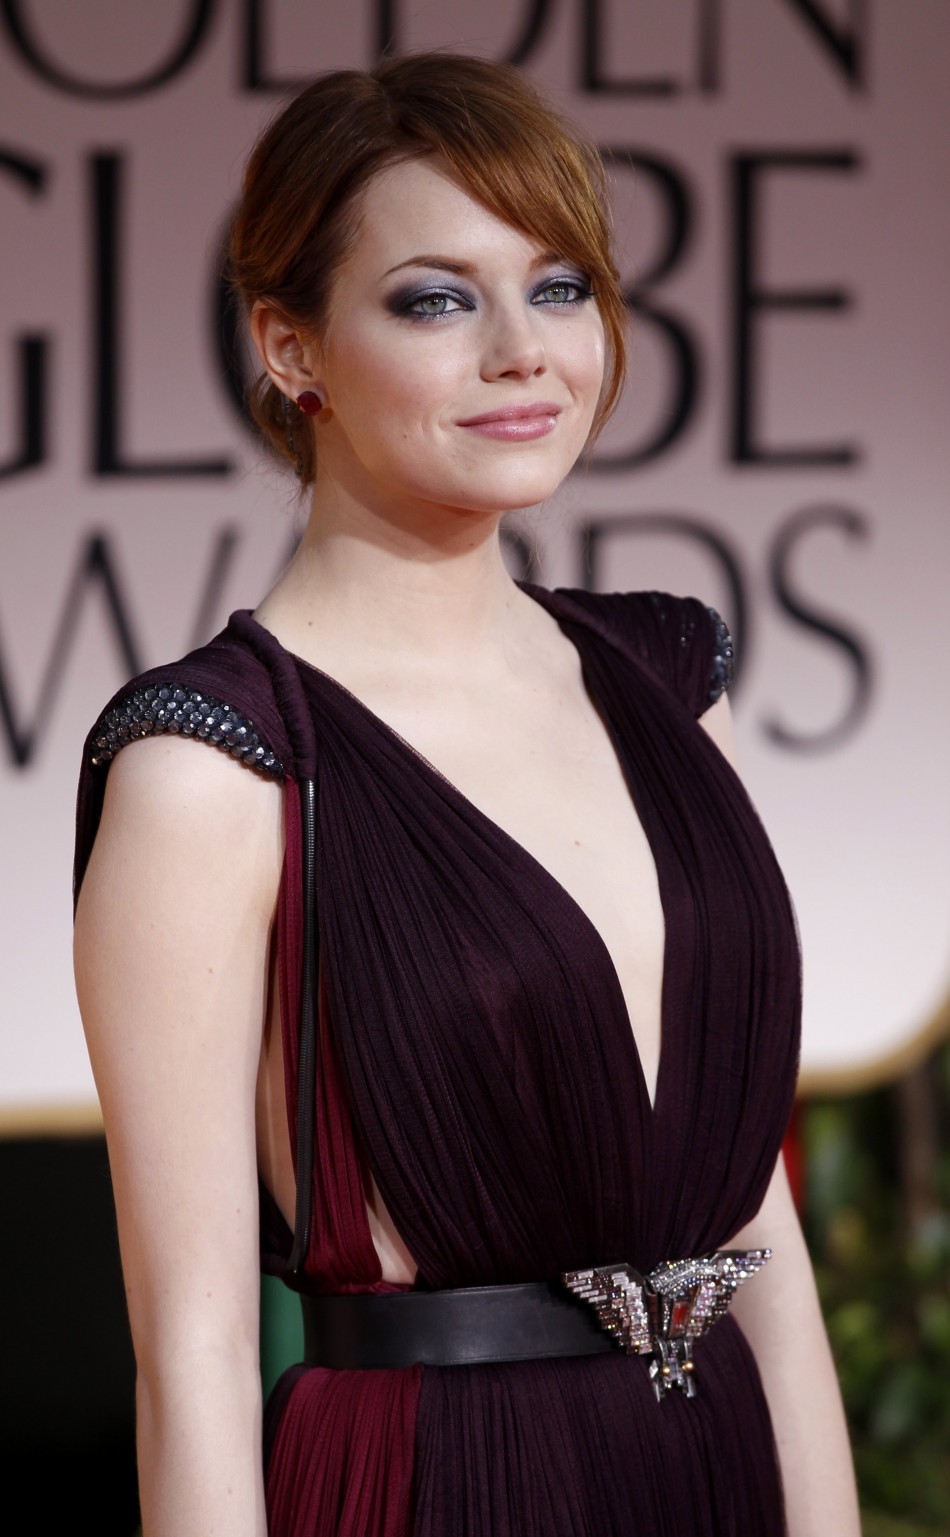 adel alami recommends emma stone pokies pic